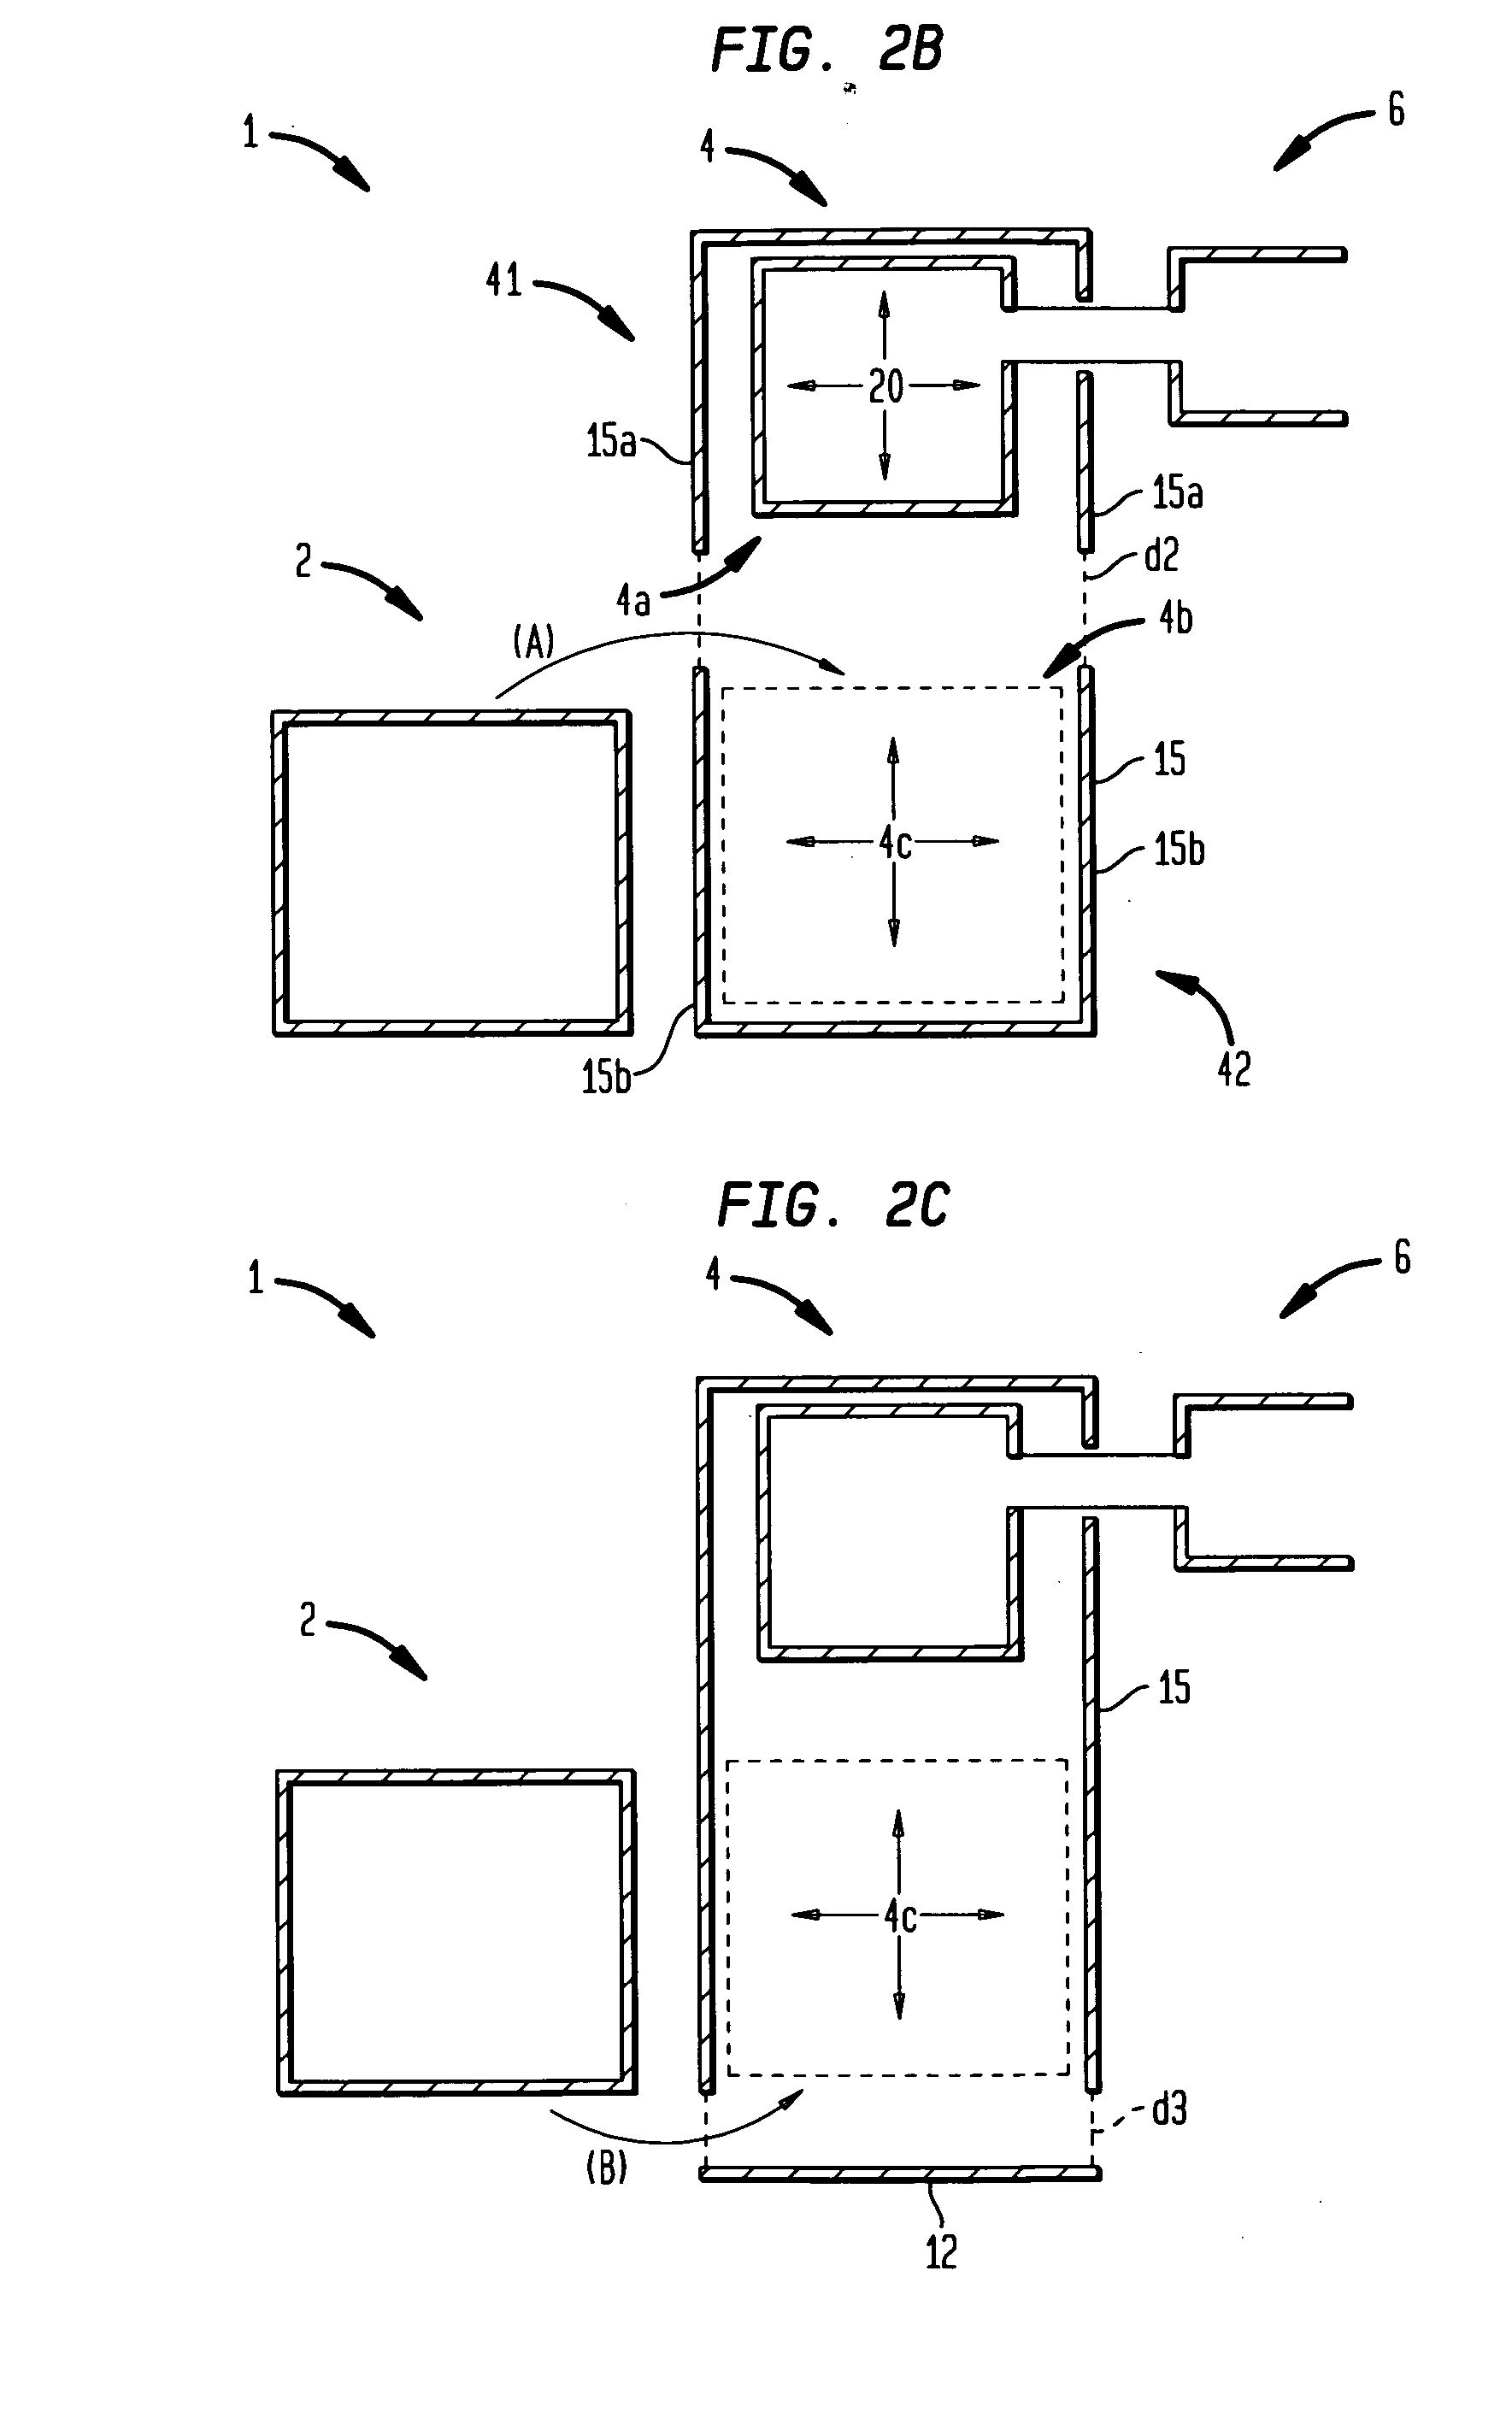 Method for administration of therapeutic gases